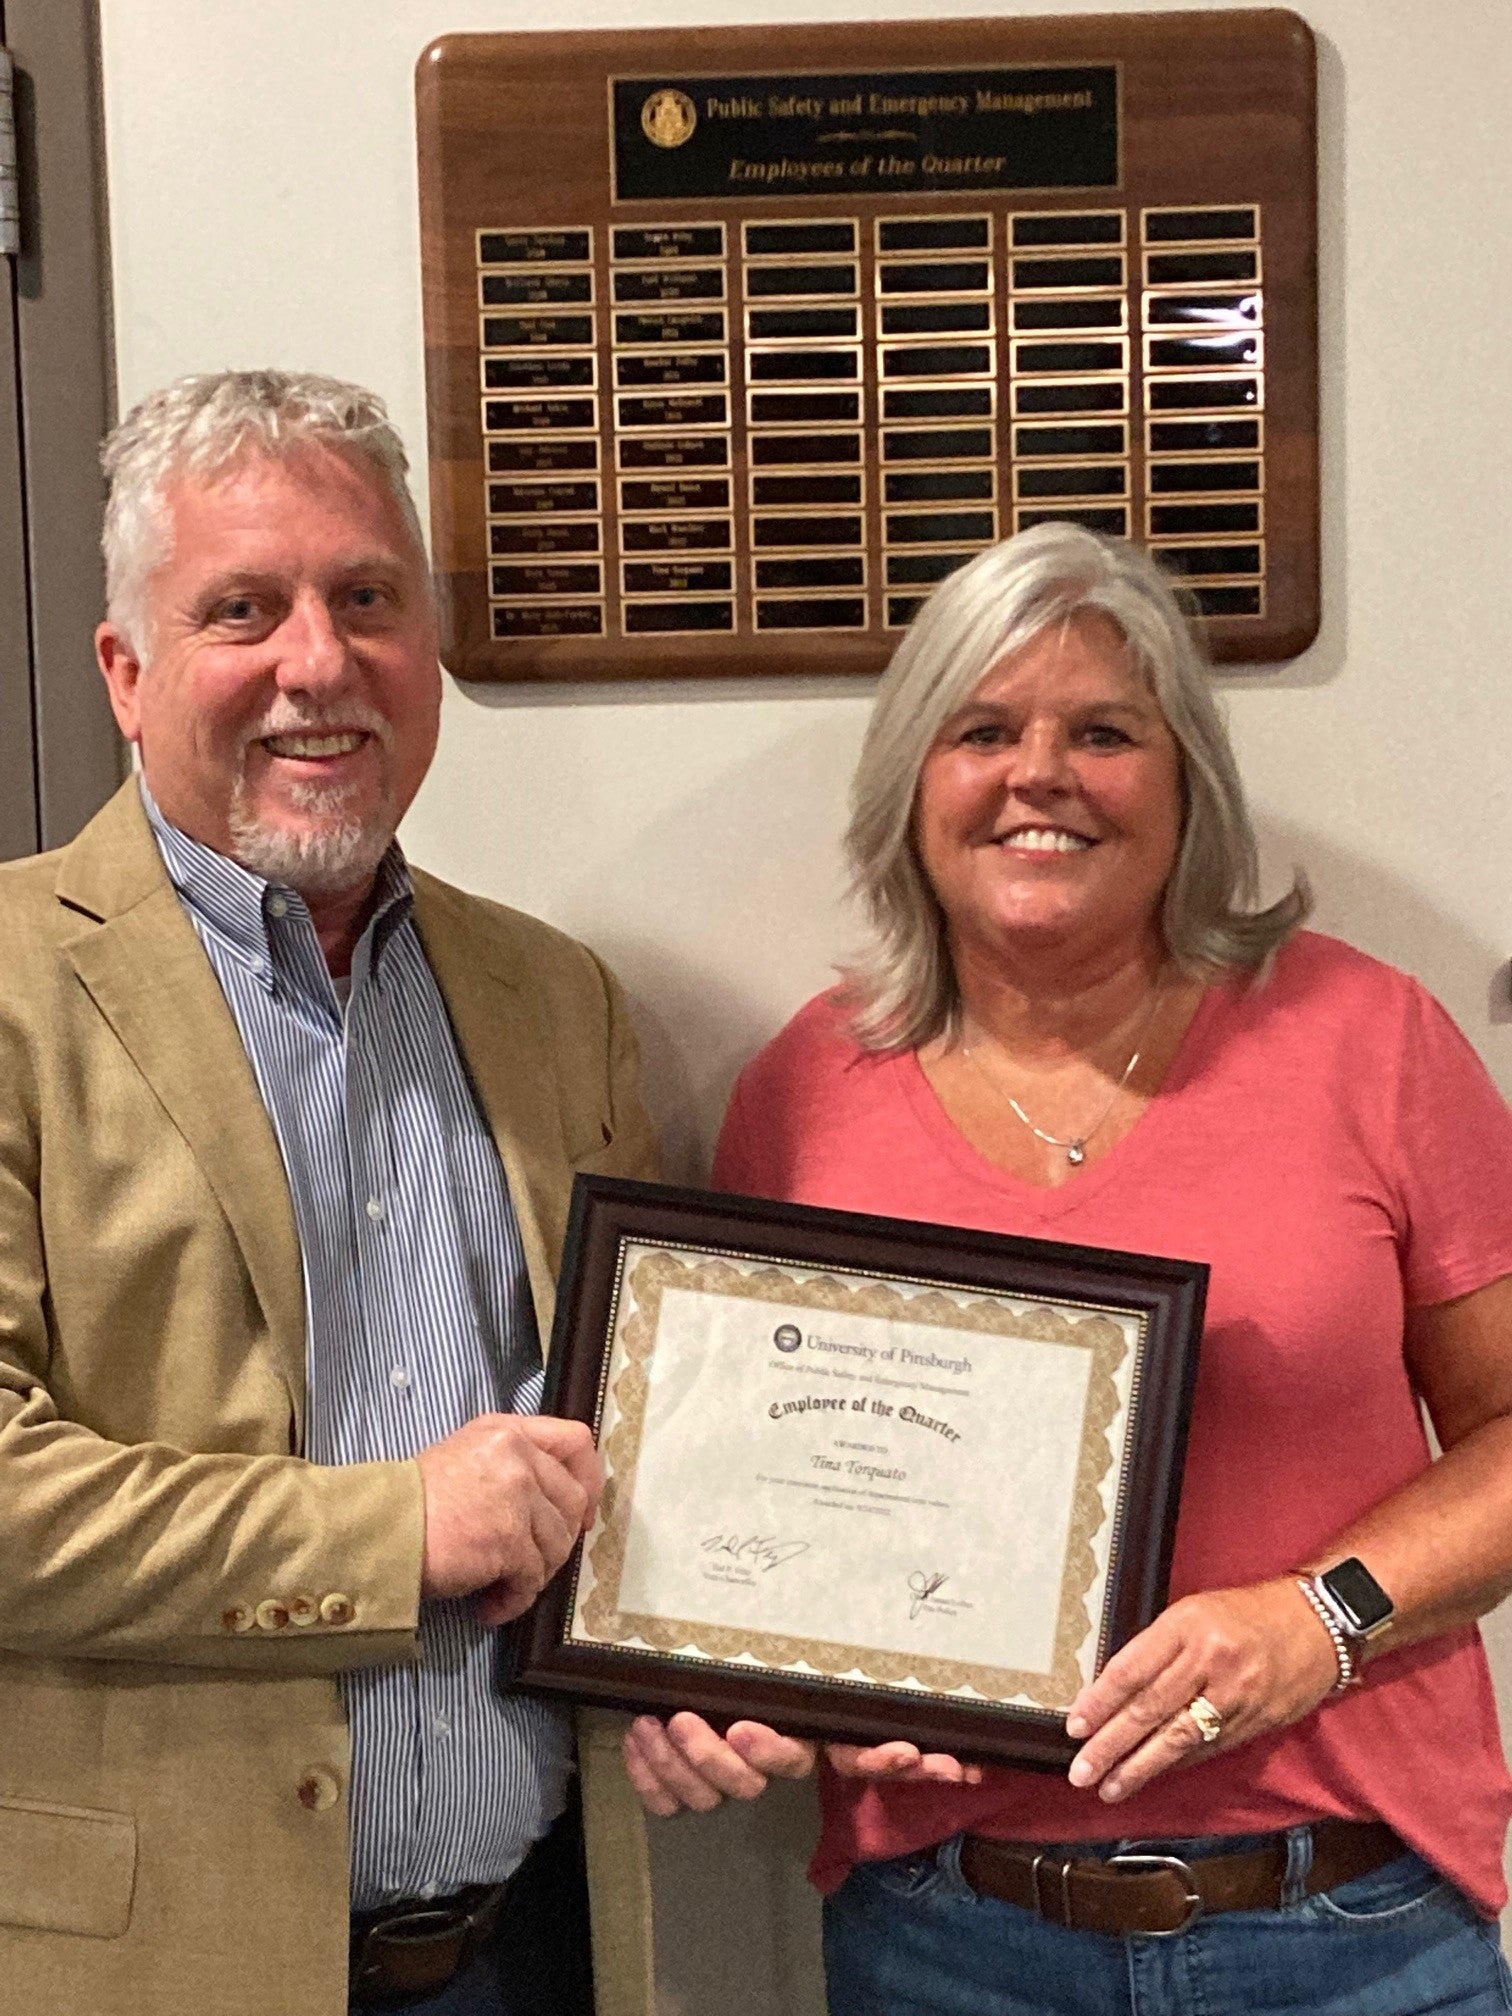 Tina Torquato was named Employee of the Quarter. With her is Ted Fritz, the Vice Chancellor of Public Safety and Emergency Management.